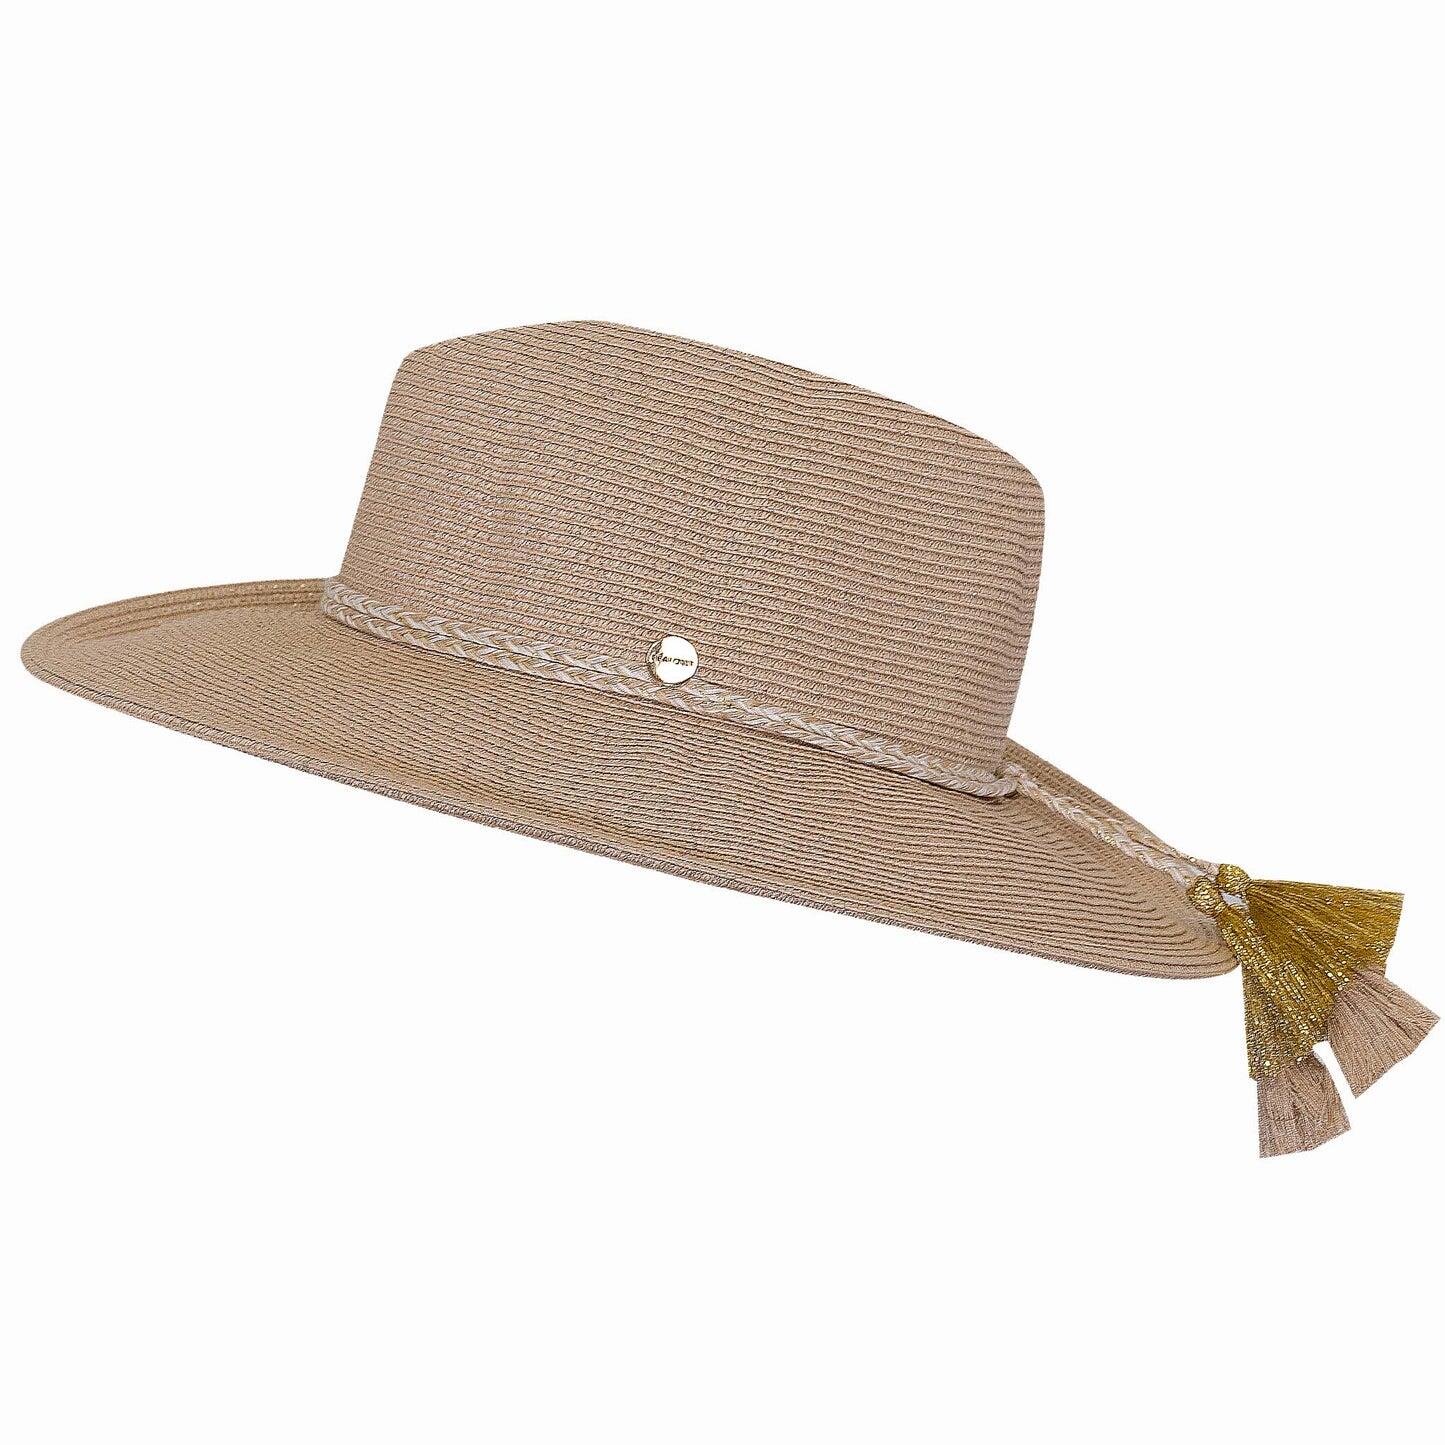 Collapsible Fedora Hat Gold